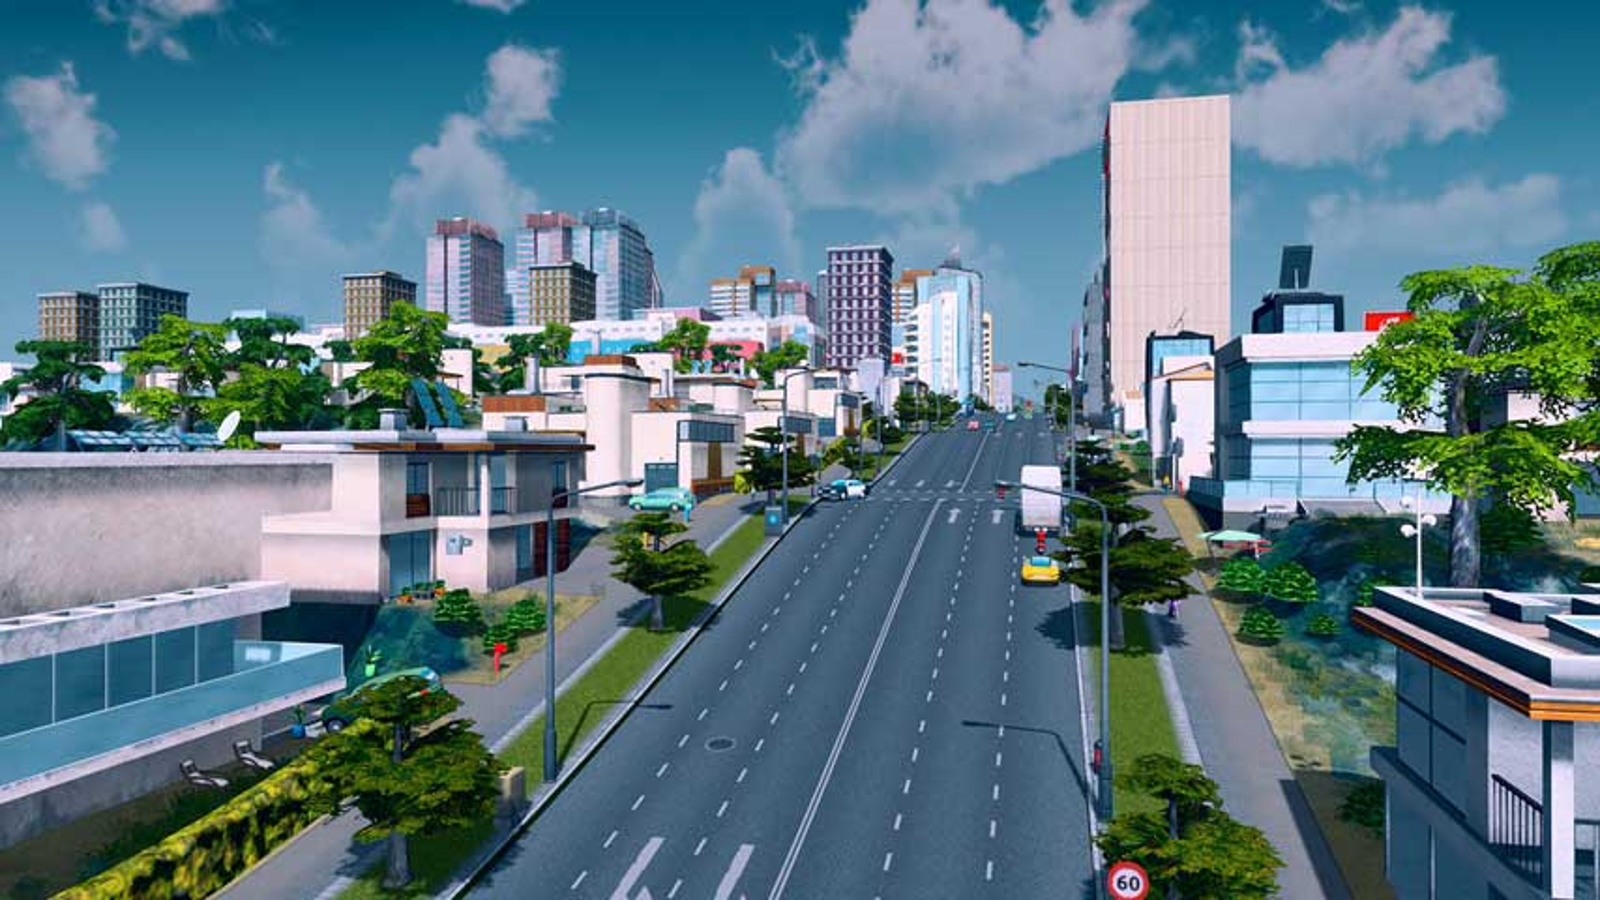 MULTIPLAYER CITIES: SKYLINES? - YES, IT WORKS! 